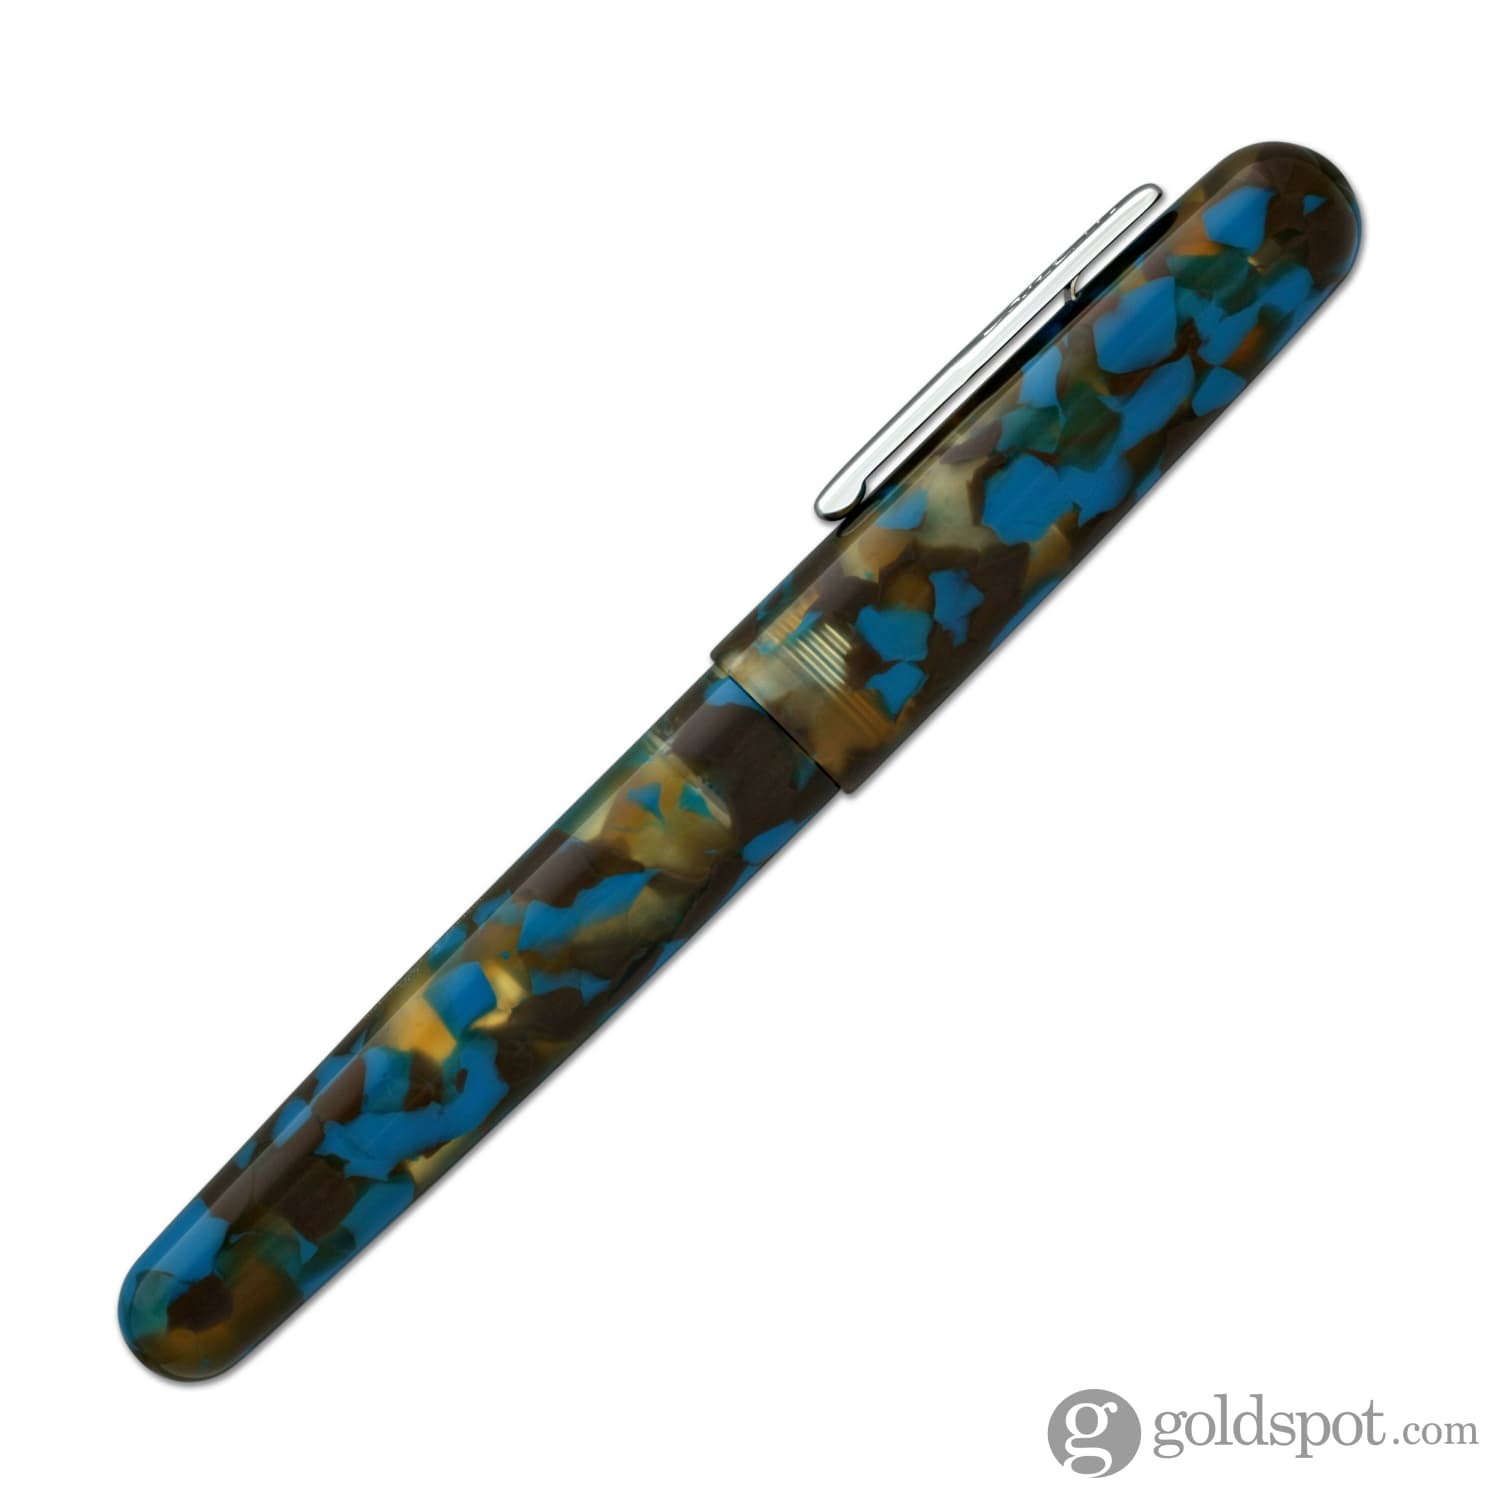 Conklin All American Fountain Pen in Southwest Turquoise